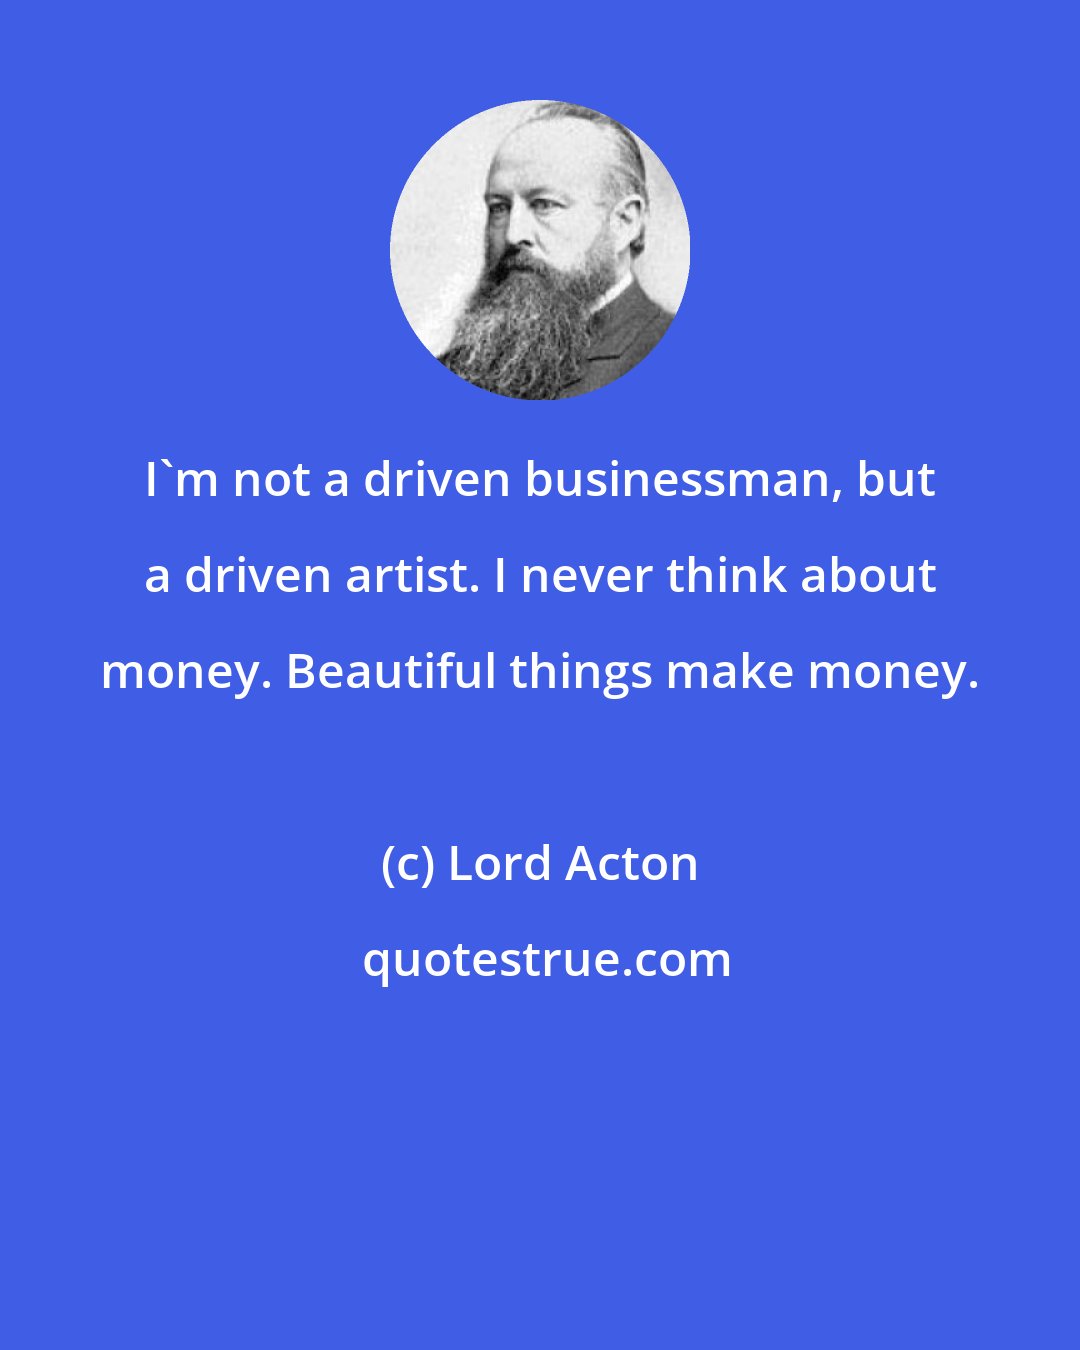 Lord Acton: I'm not a driven businessman, but a driven artist. I never think about money. Beautiful things make money.